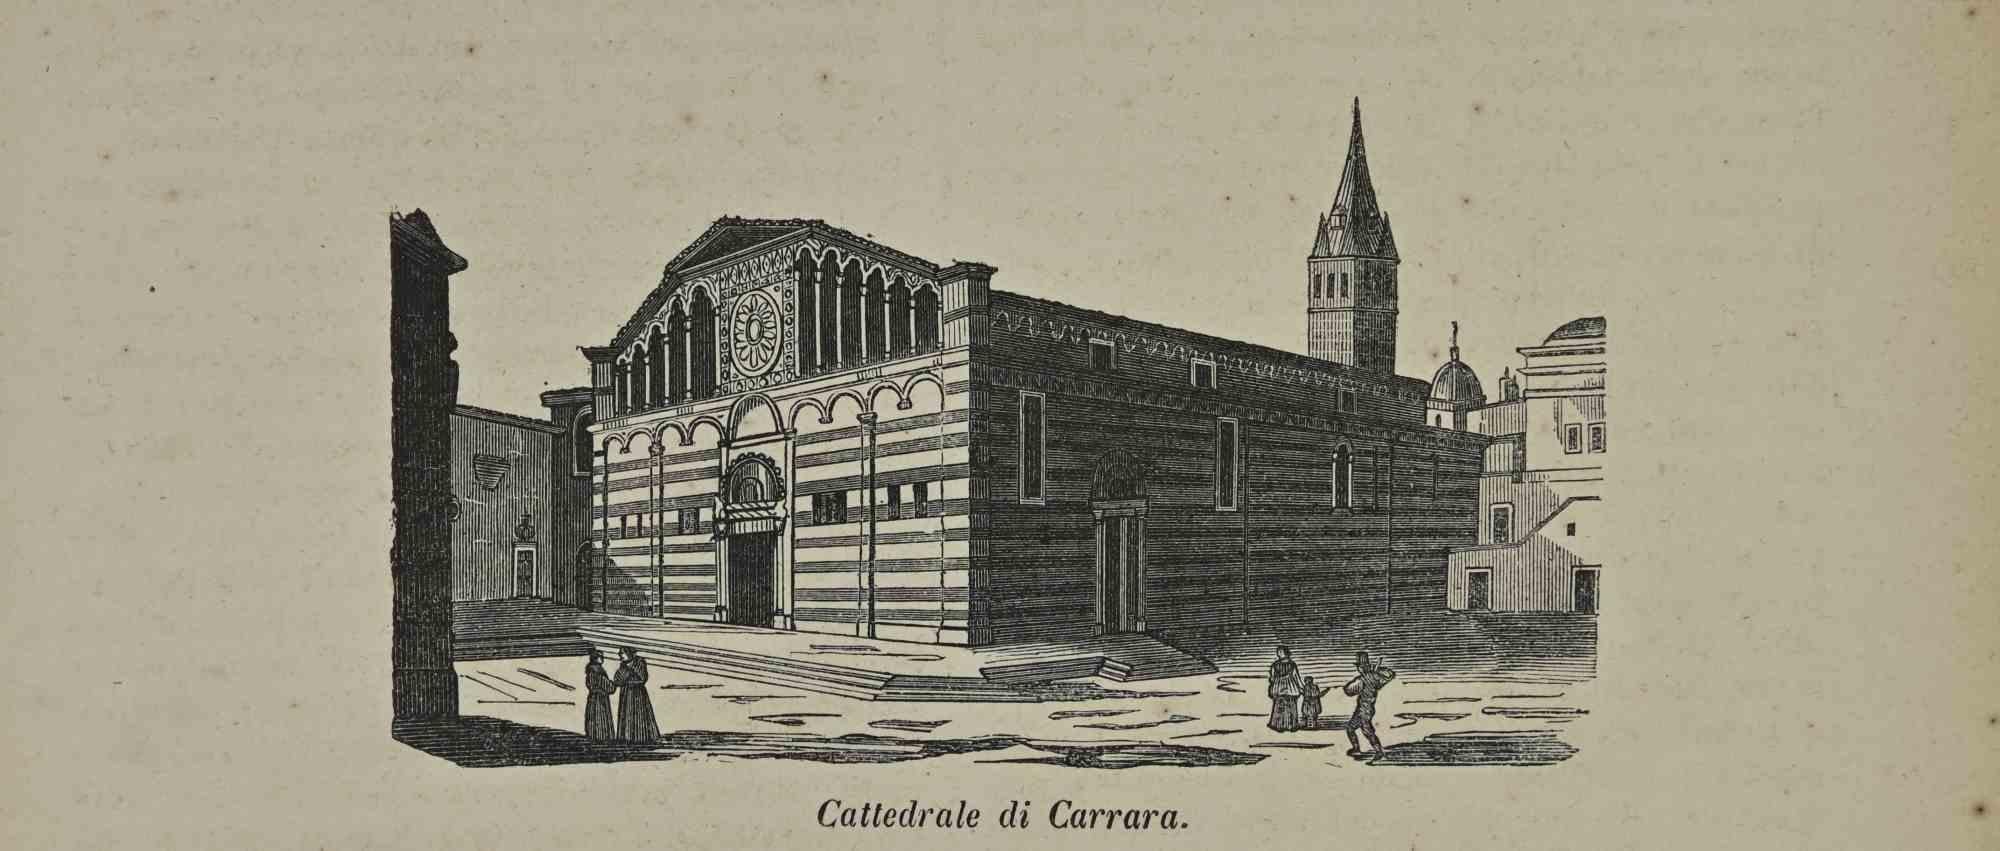 Various Artists Figurative Print - Uses and Customs - Cathedral in Carrara - Lithograph - 1862